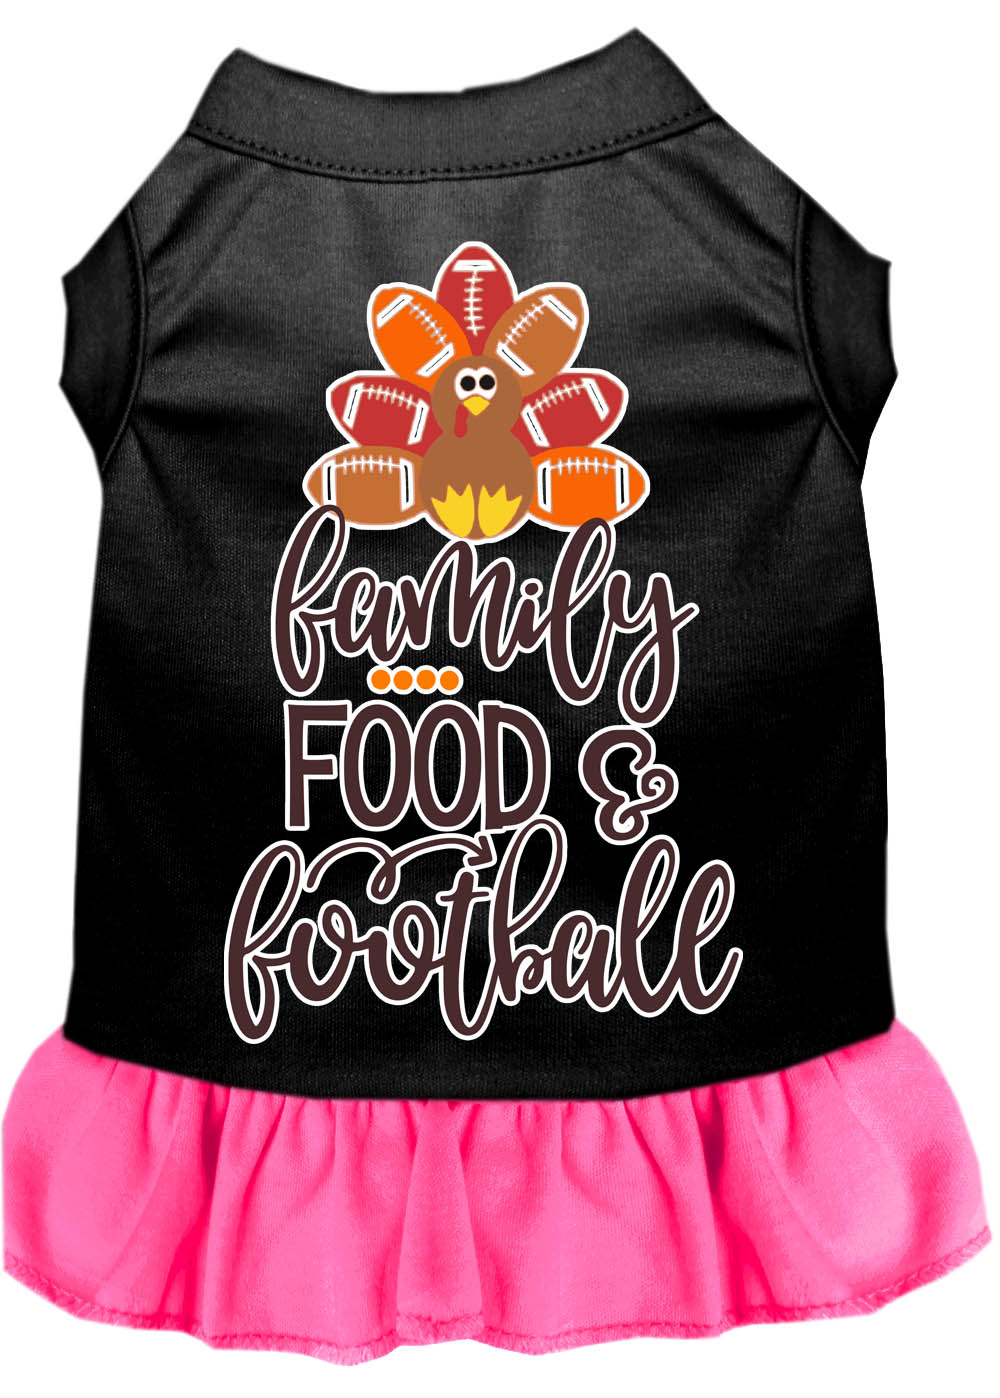 Family, Food, and Football Screen Print Dog Dress Black with Bright Pink Med